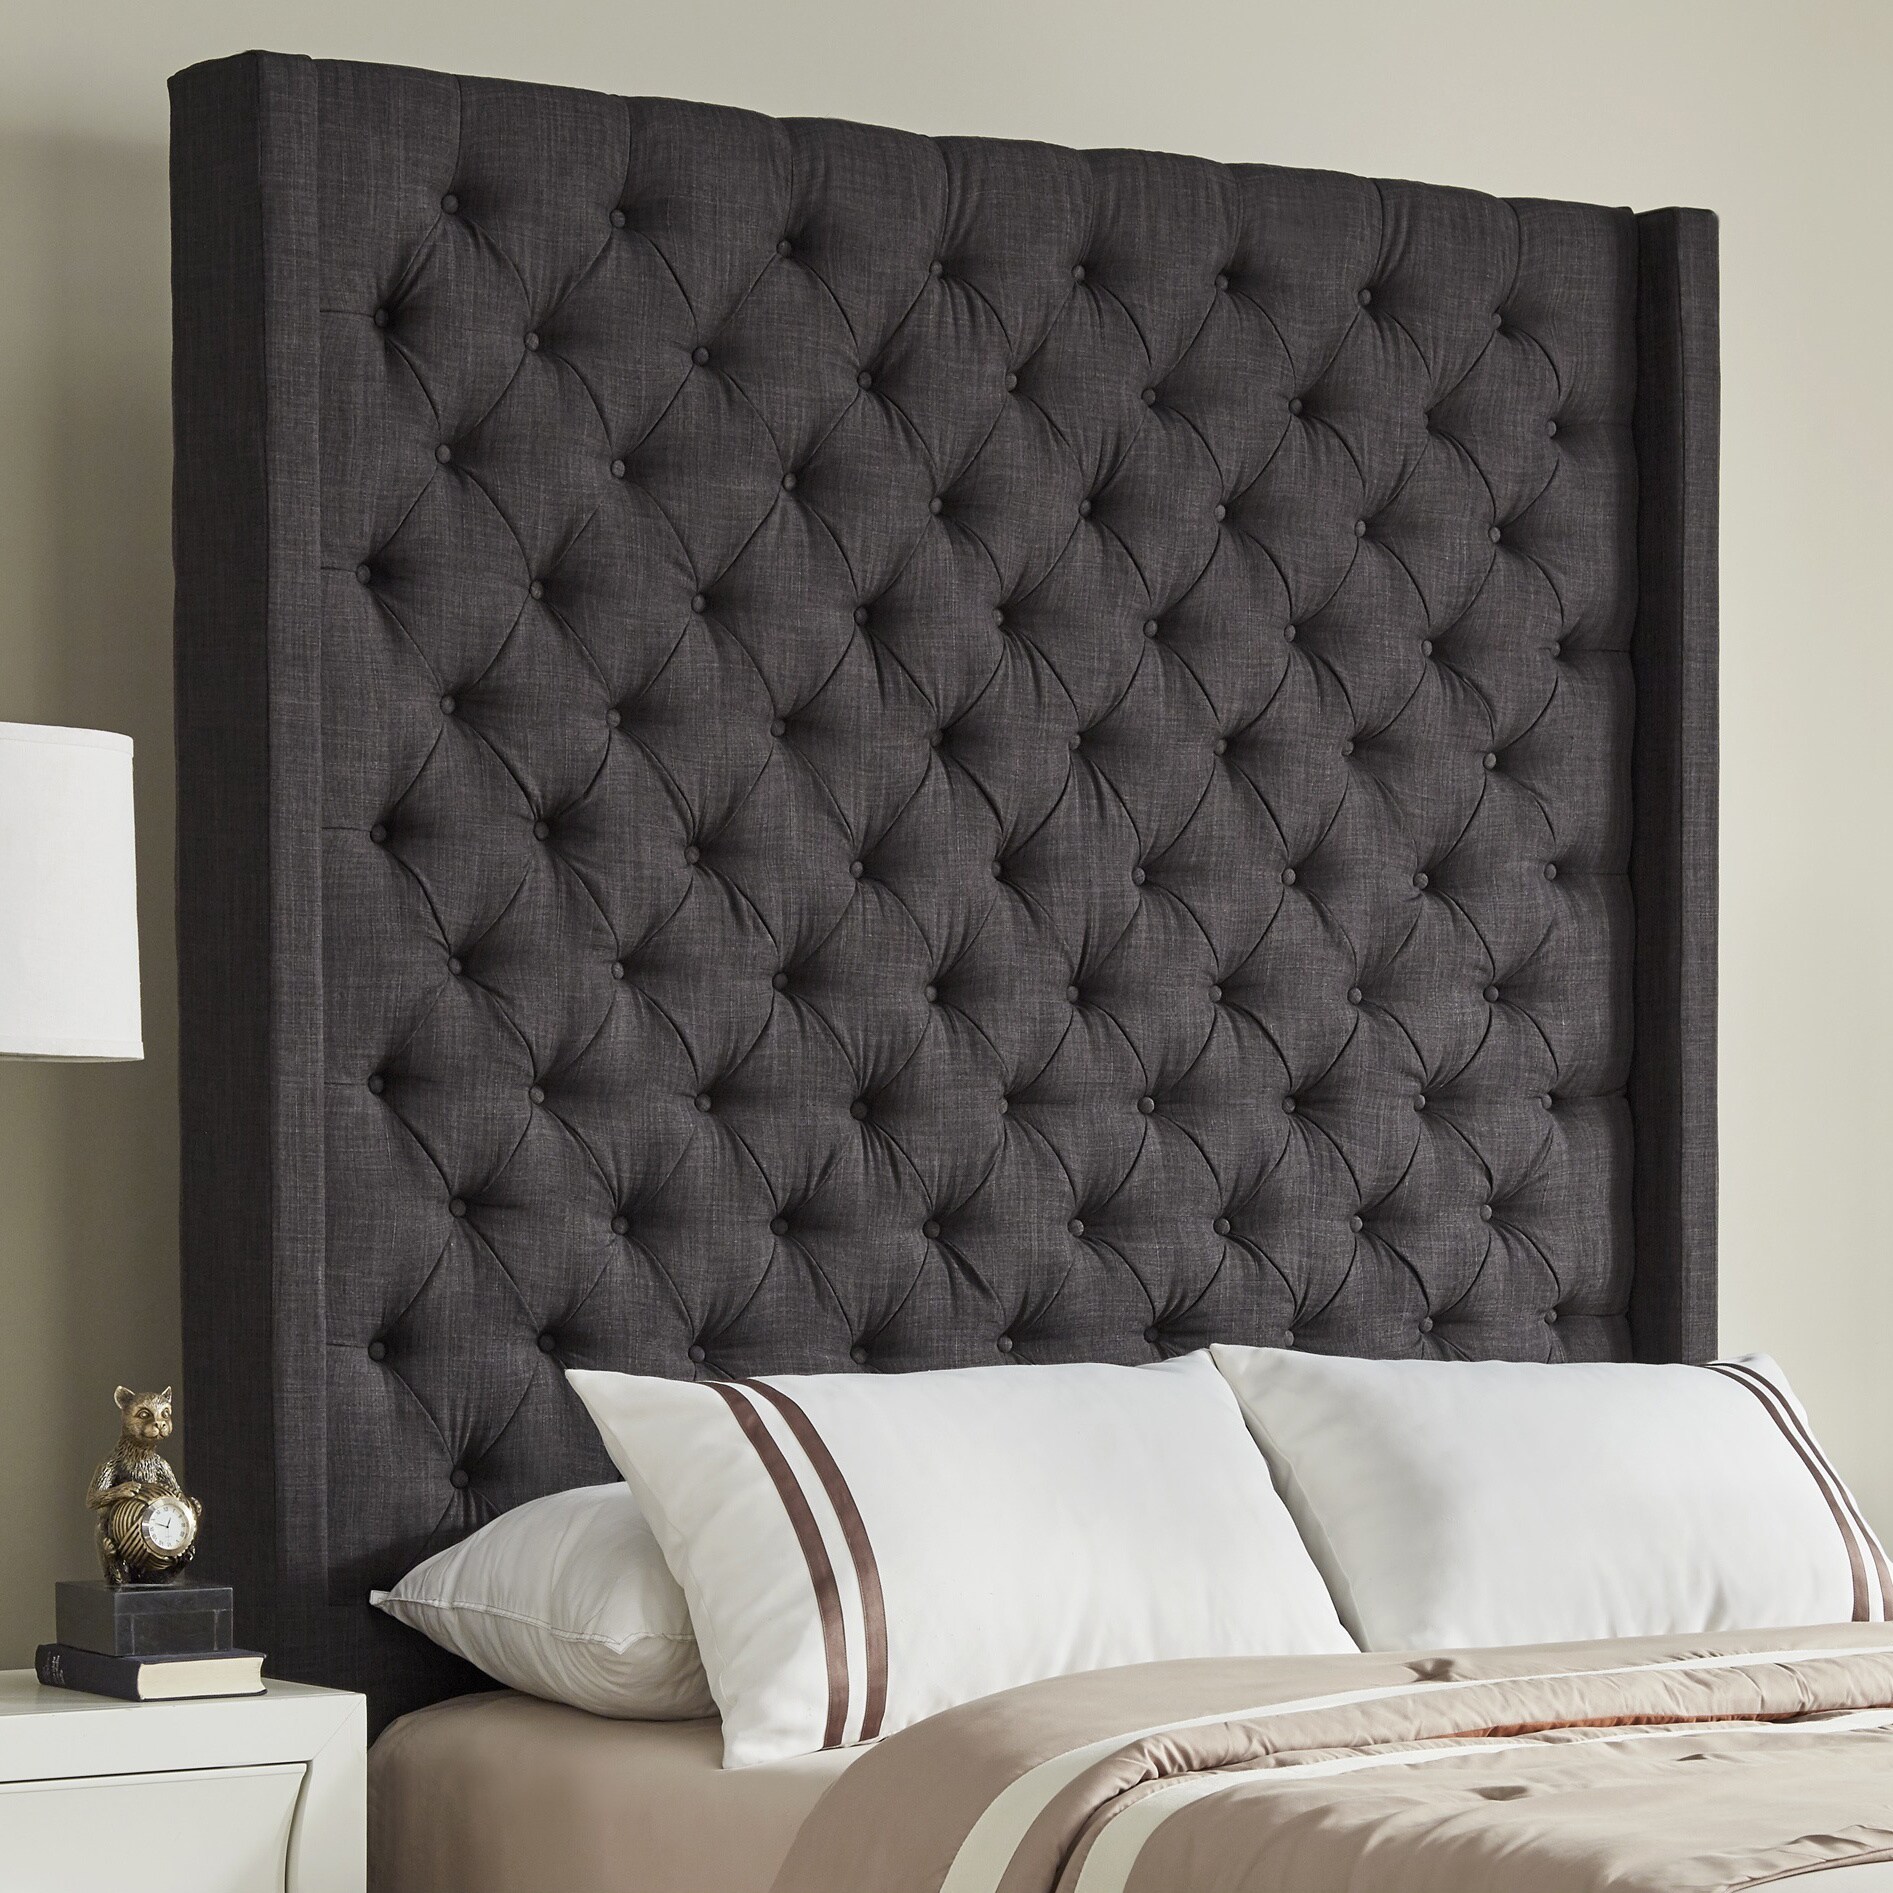 HYPNOS 5FT 150cm Kingsize SAVOY GUEST Bed Headboard Stone